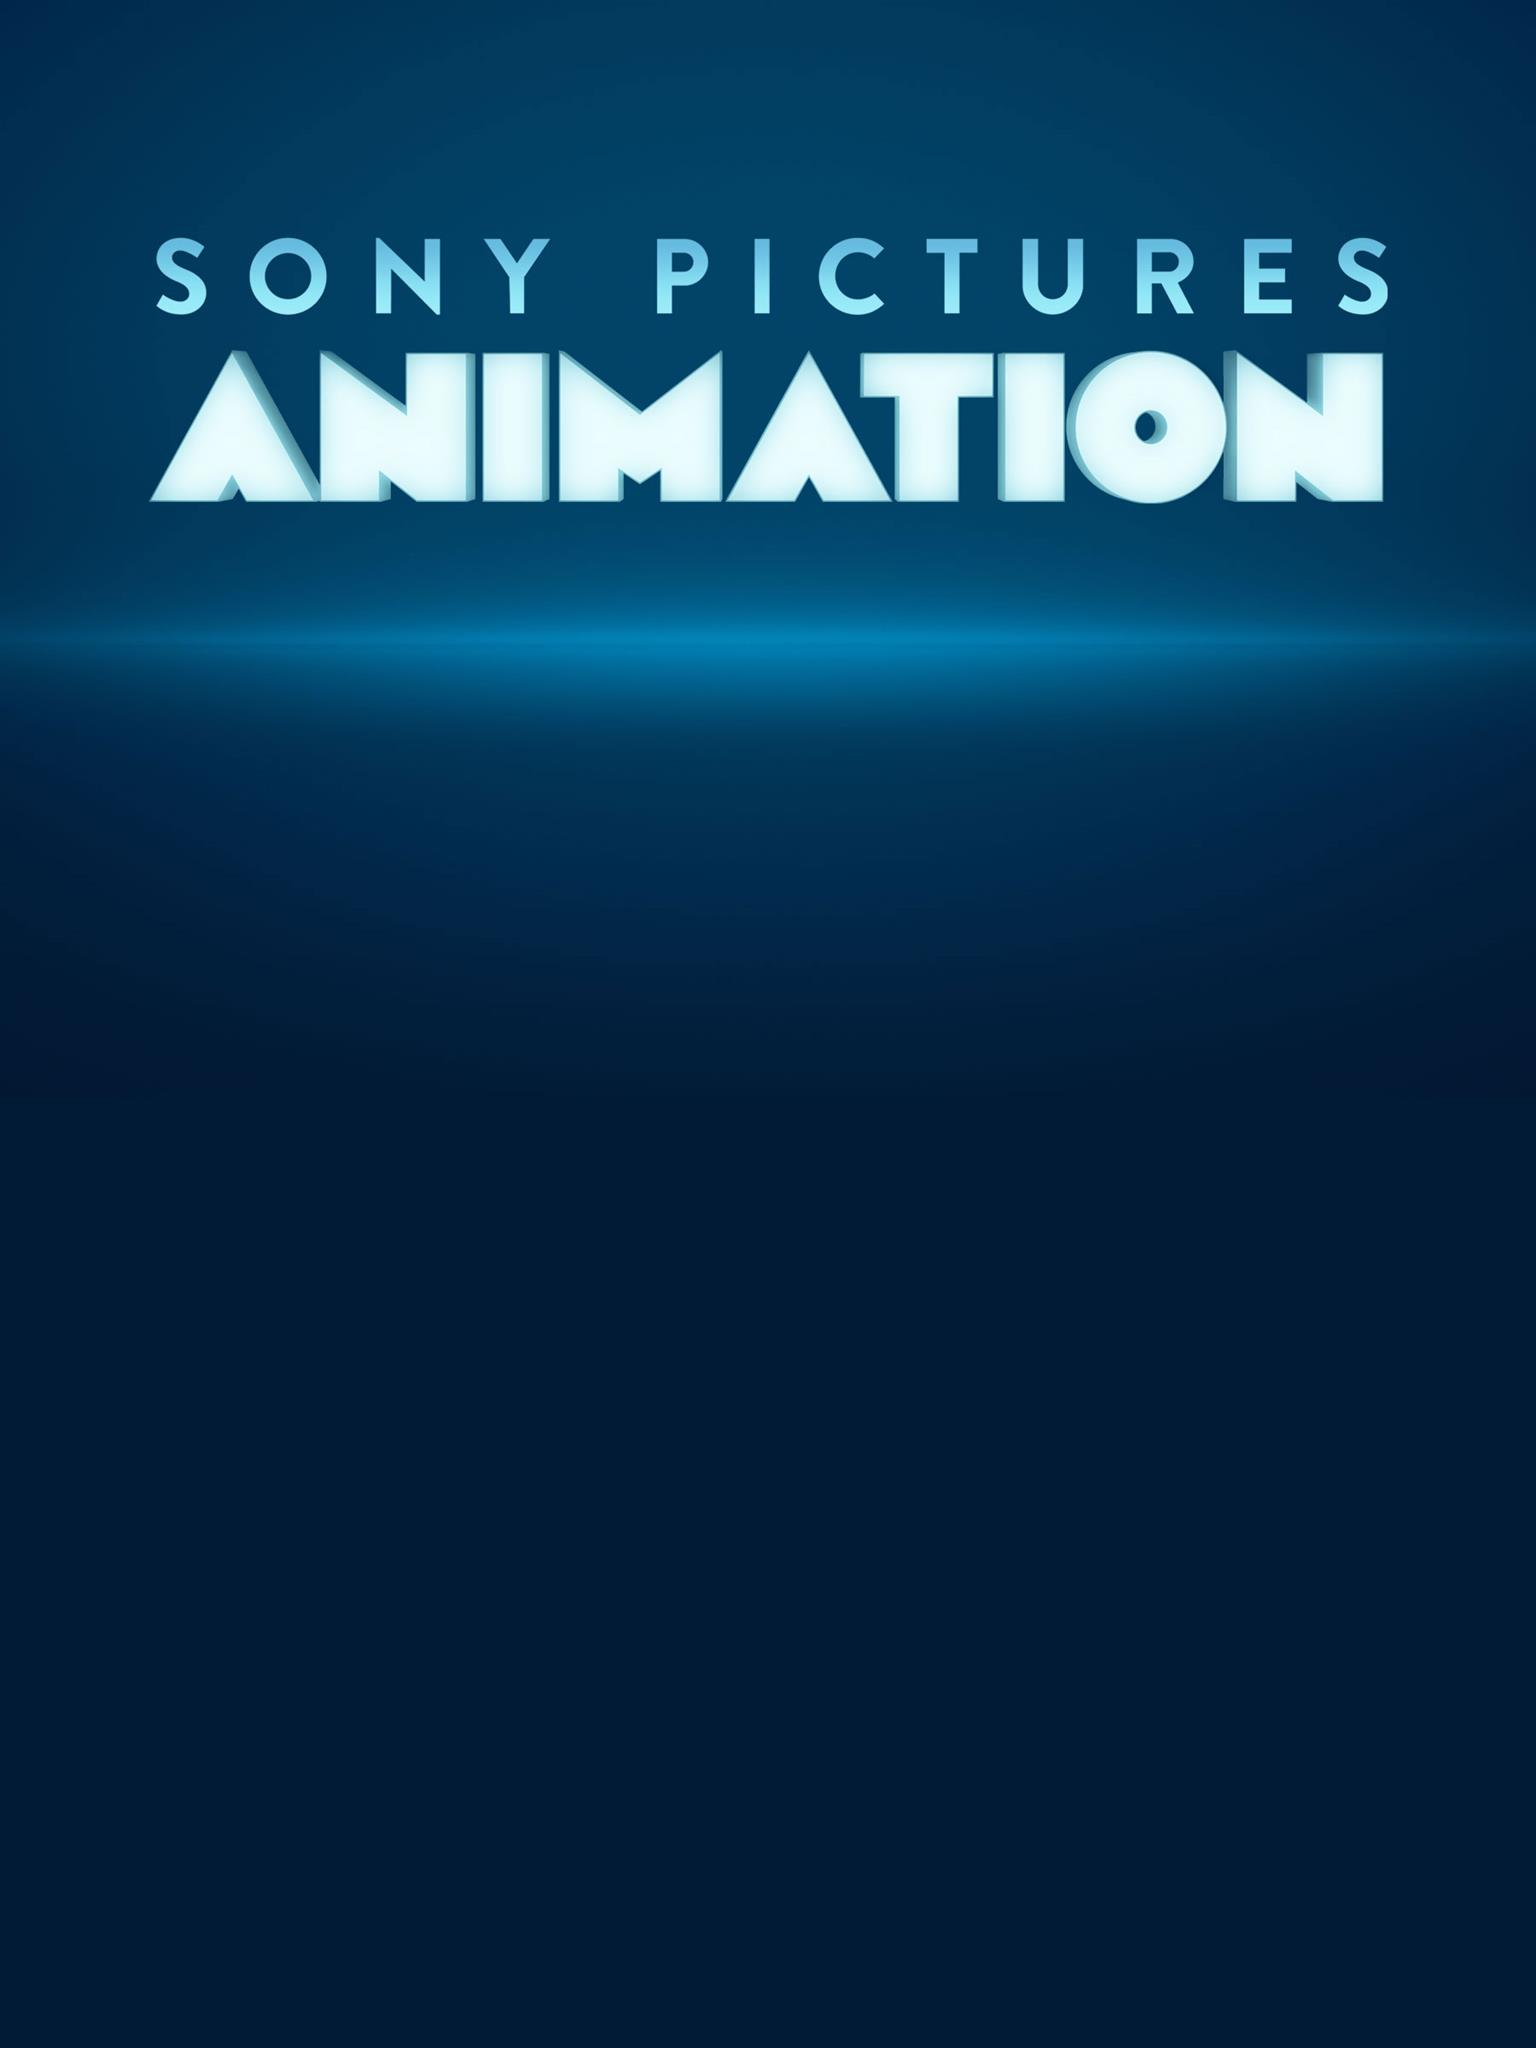 About | Sony Pictures Animation